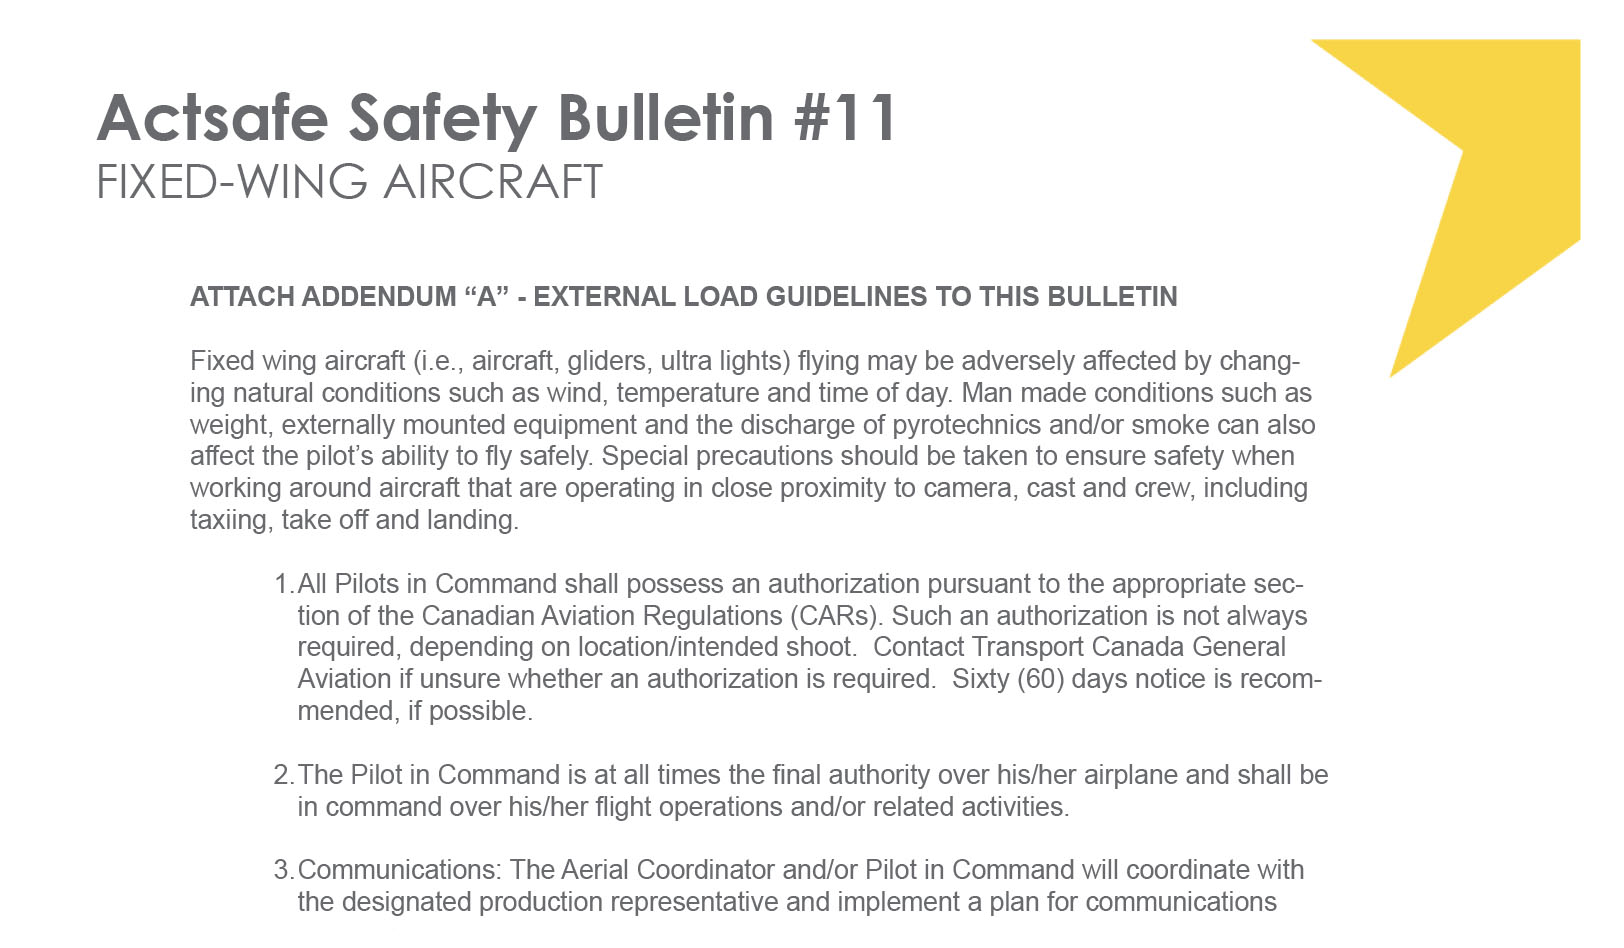 #11 Fixed Wing Aircraft Motion Picture Safety Bulletin